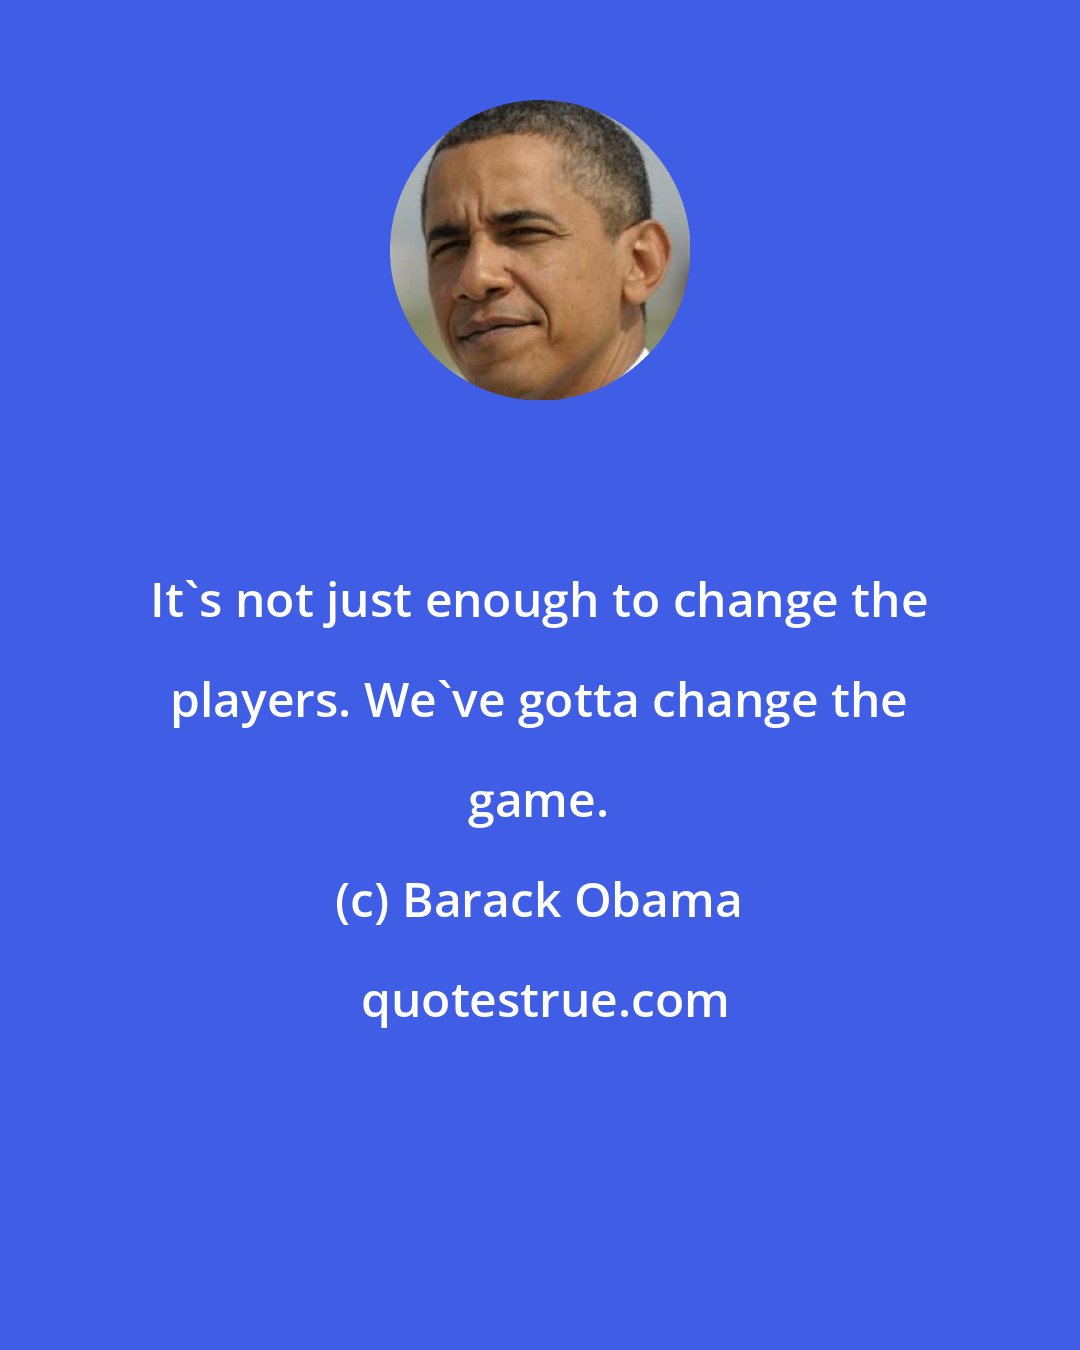 Barack Obama: It's not just enough to change the players. We've gotta change the game.